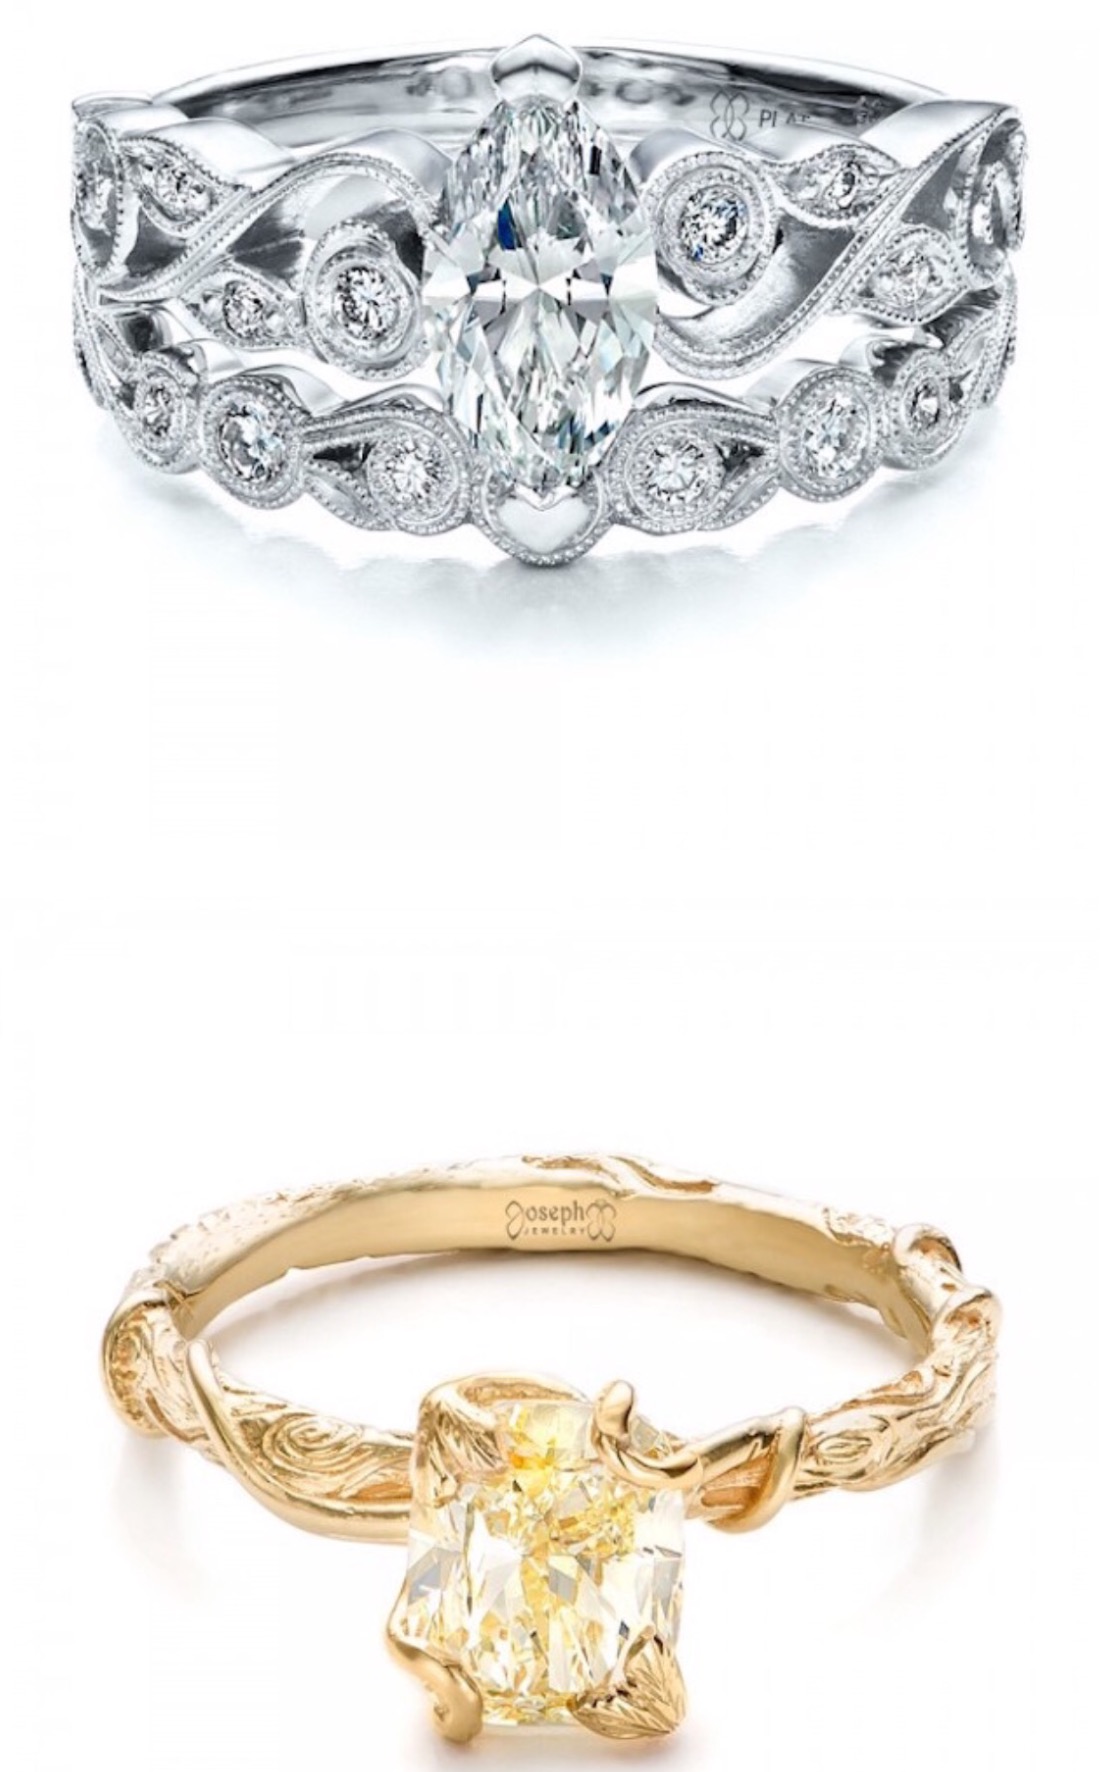 Engagement rings with textured bands and  large center stones.